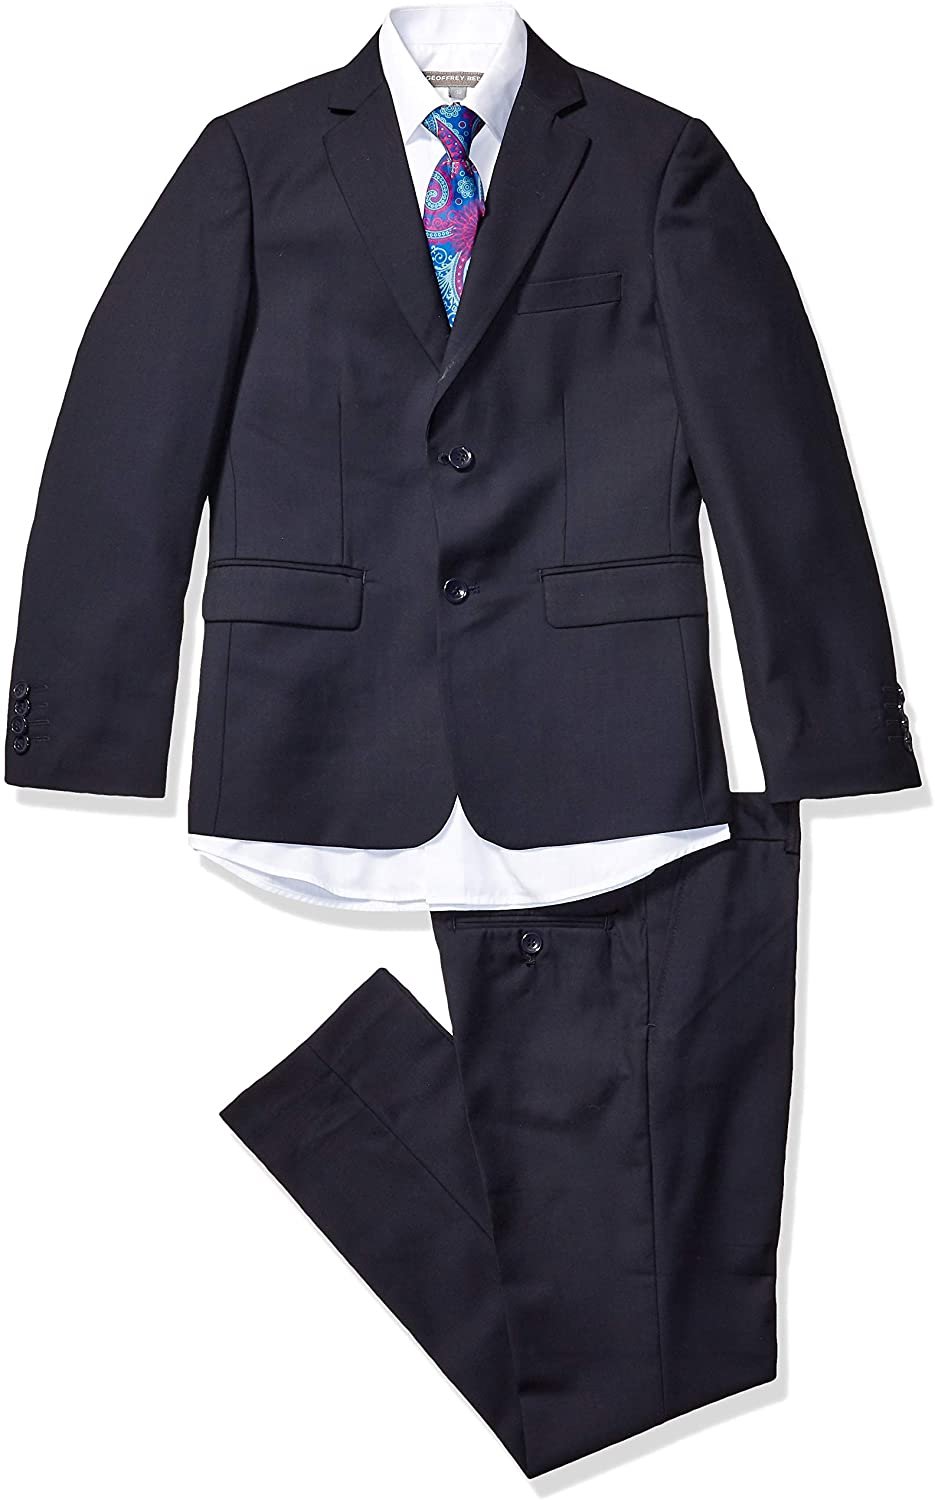 Boys 5 Piece Vested Suit Color Navy by Geoffrey Beane